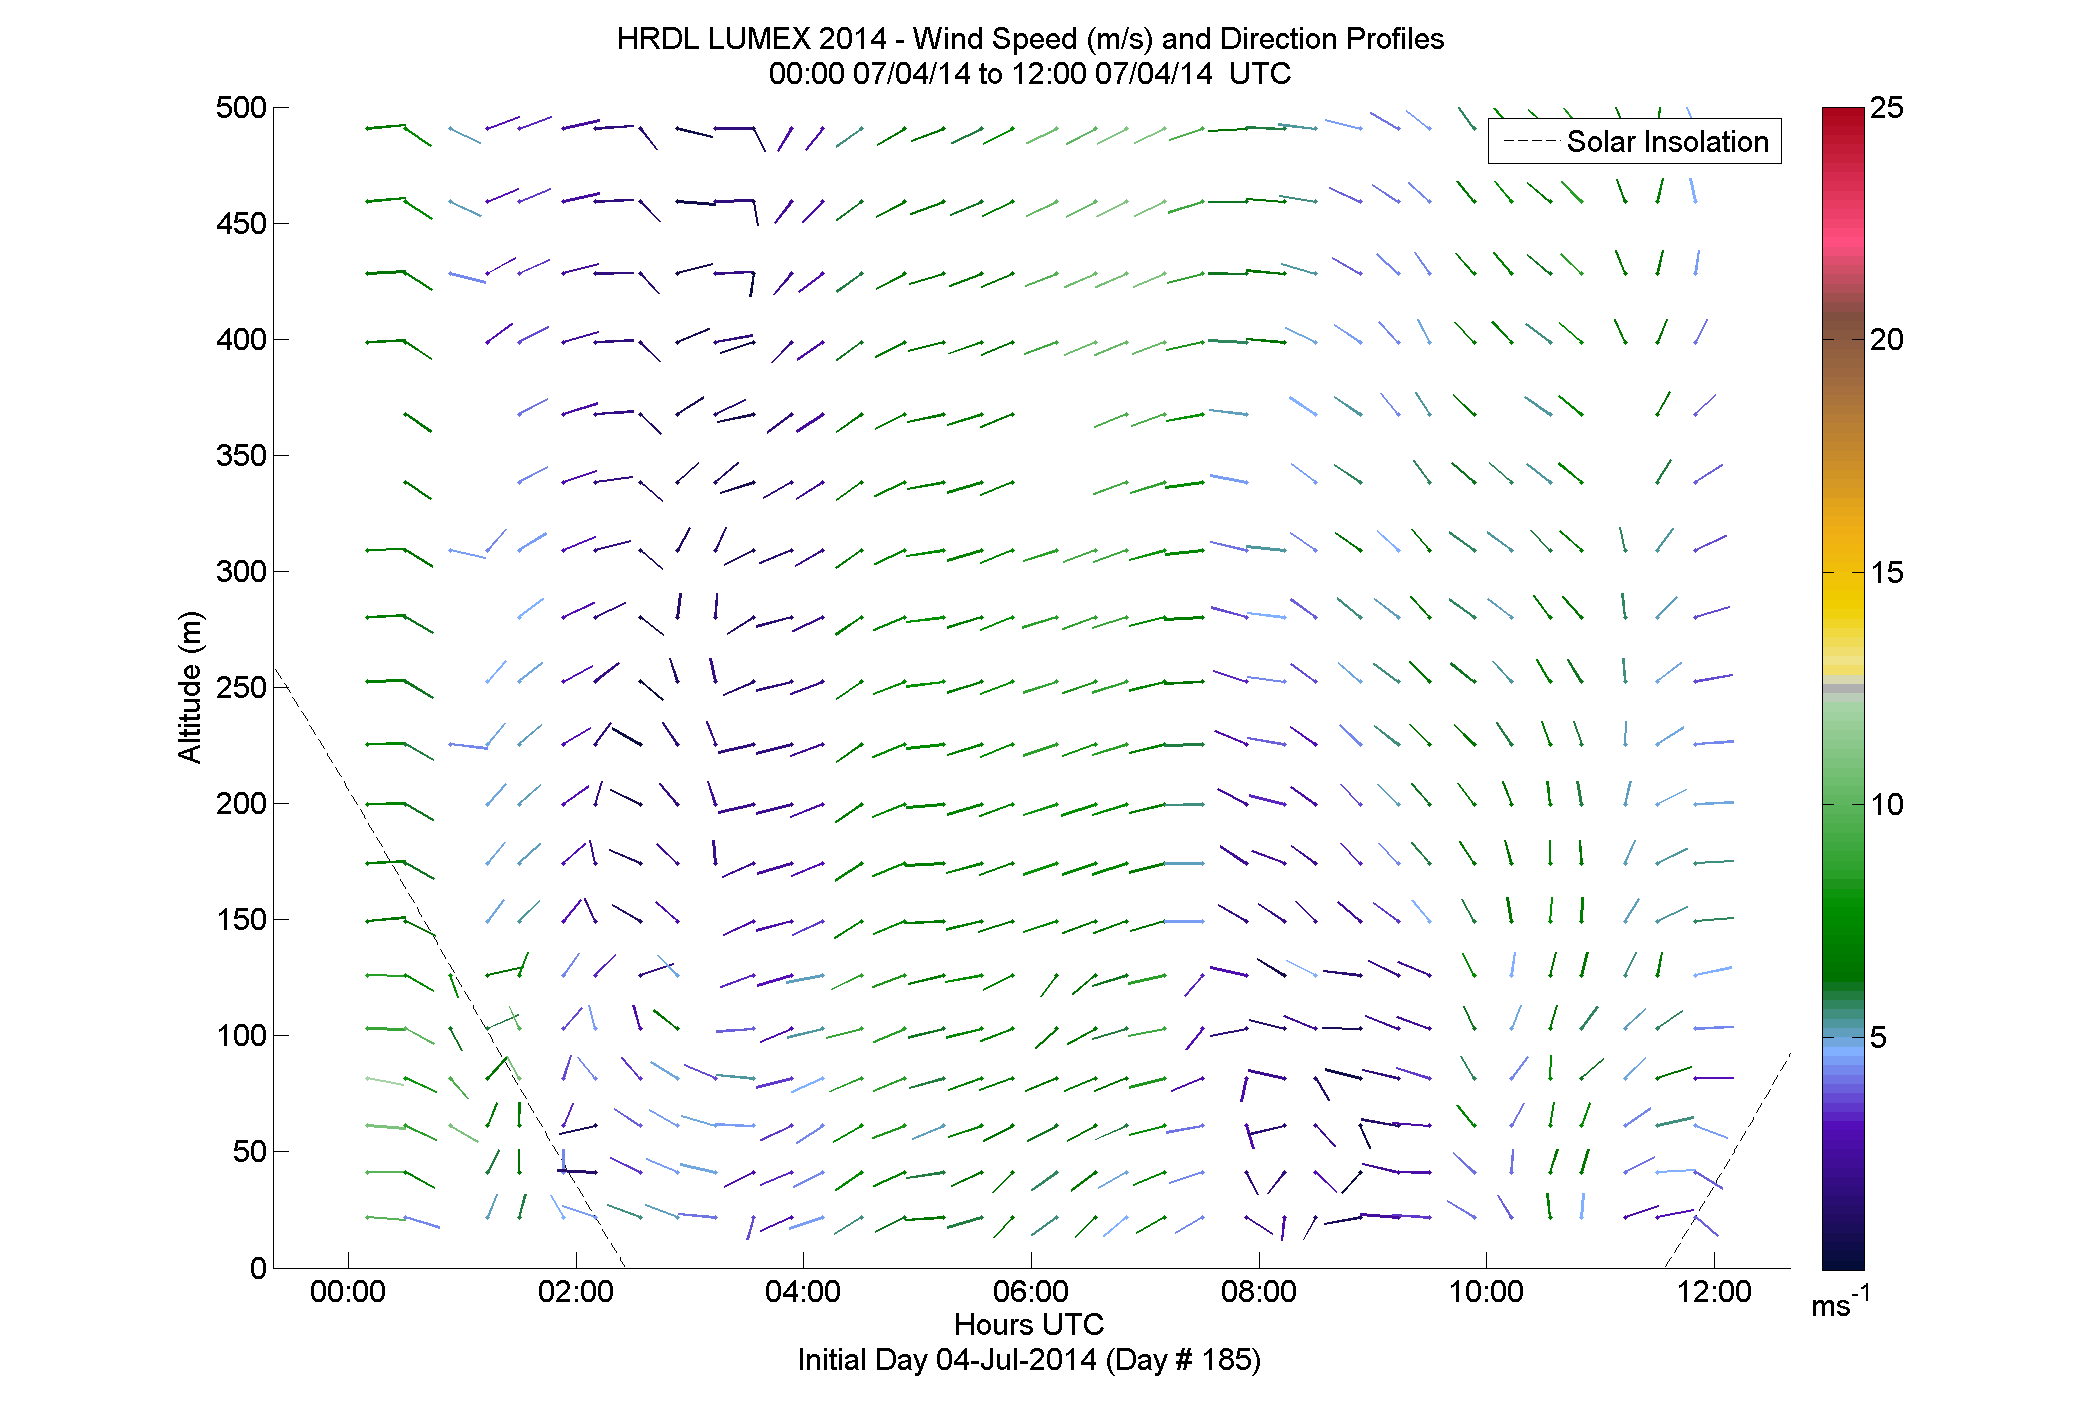 HRDL speed and direction profile - July 4 am